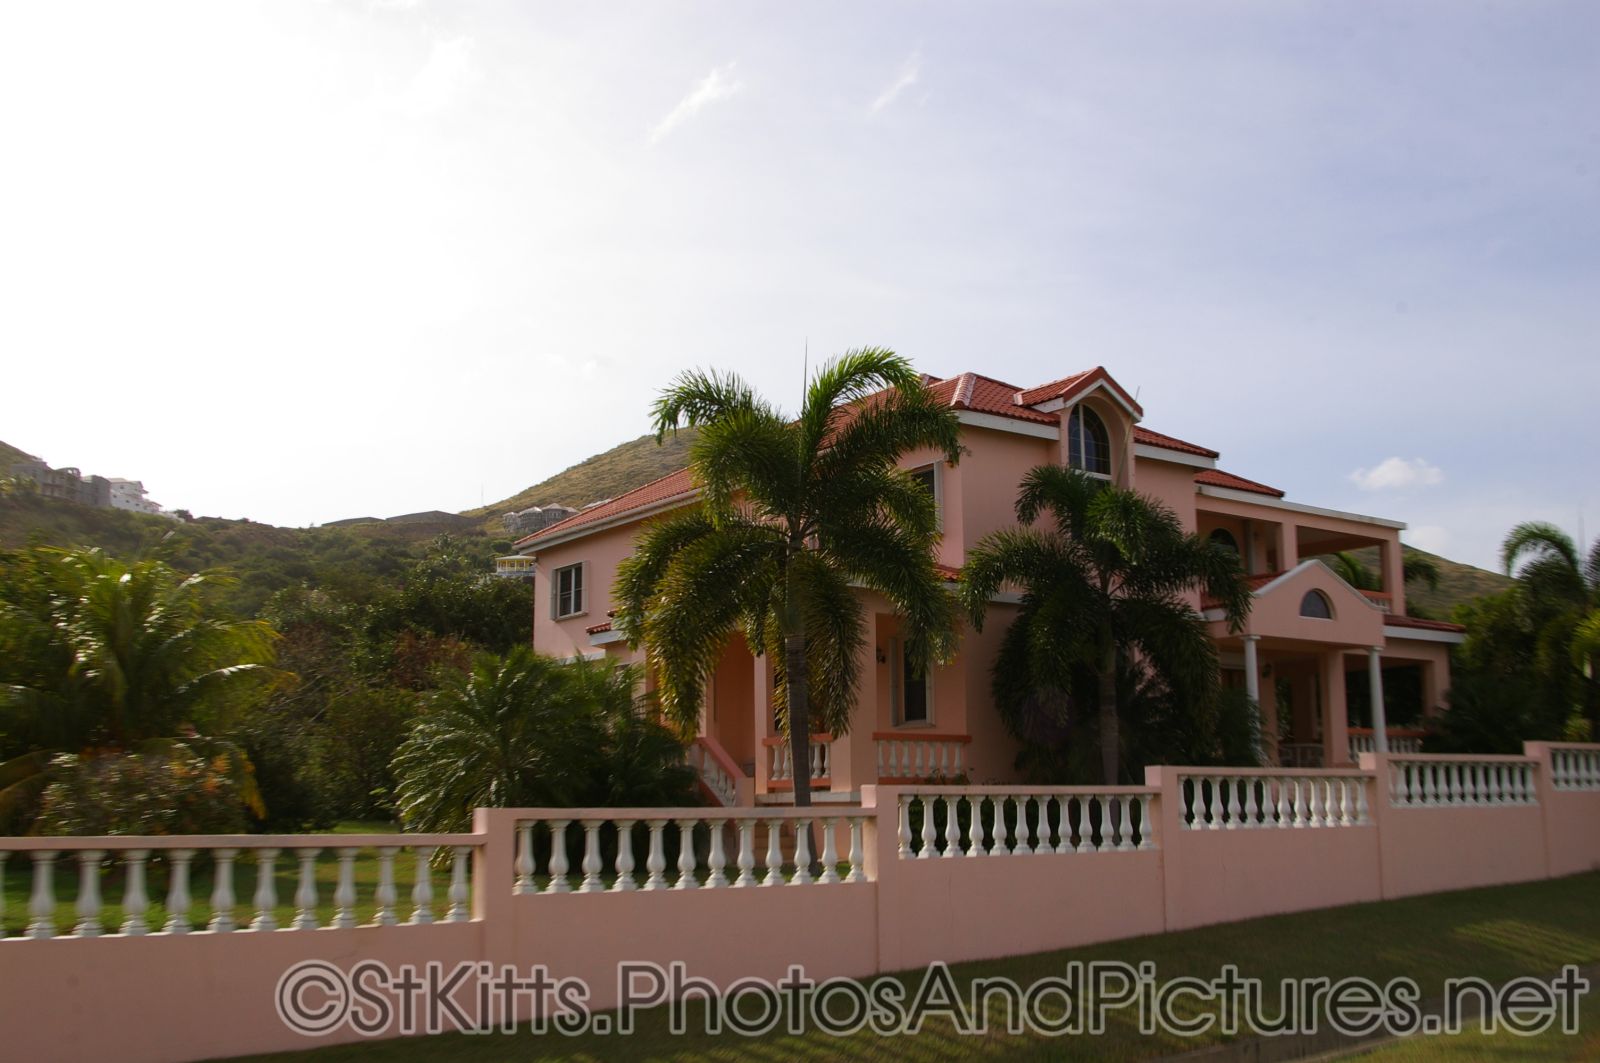 Pink home with pink walls in St Kitts.jpg
